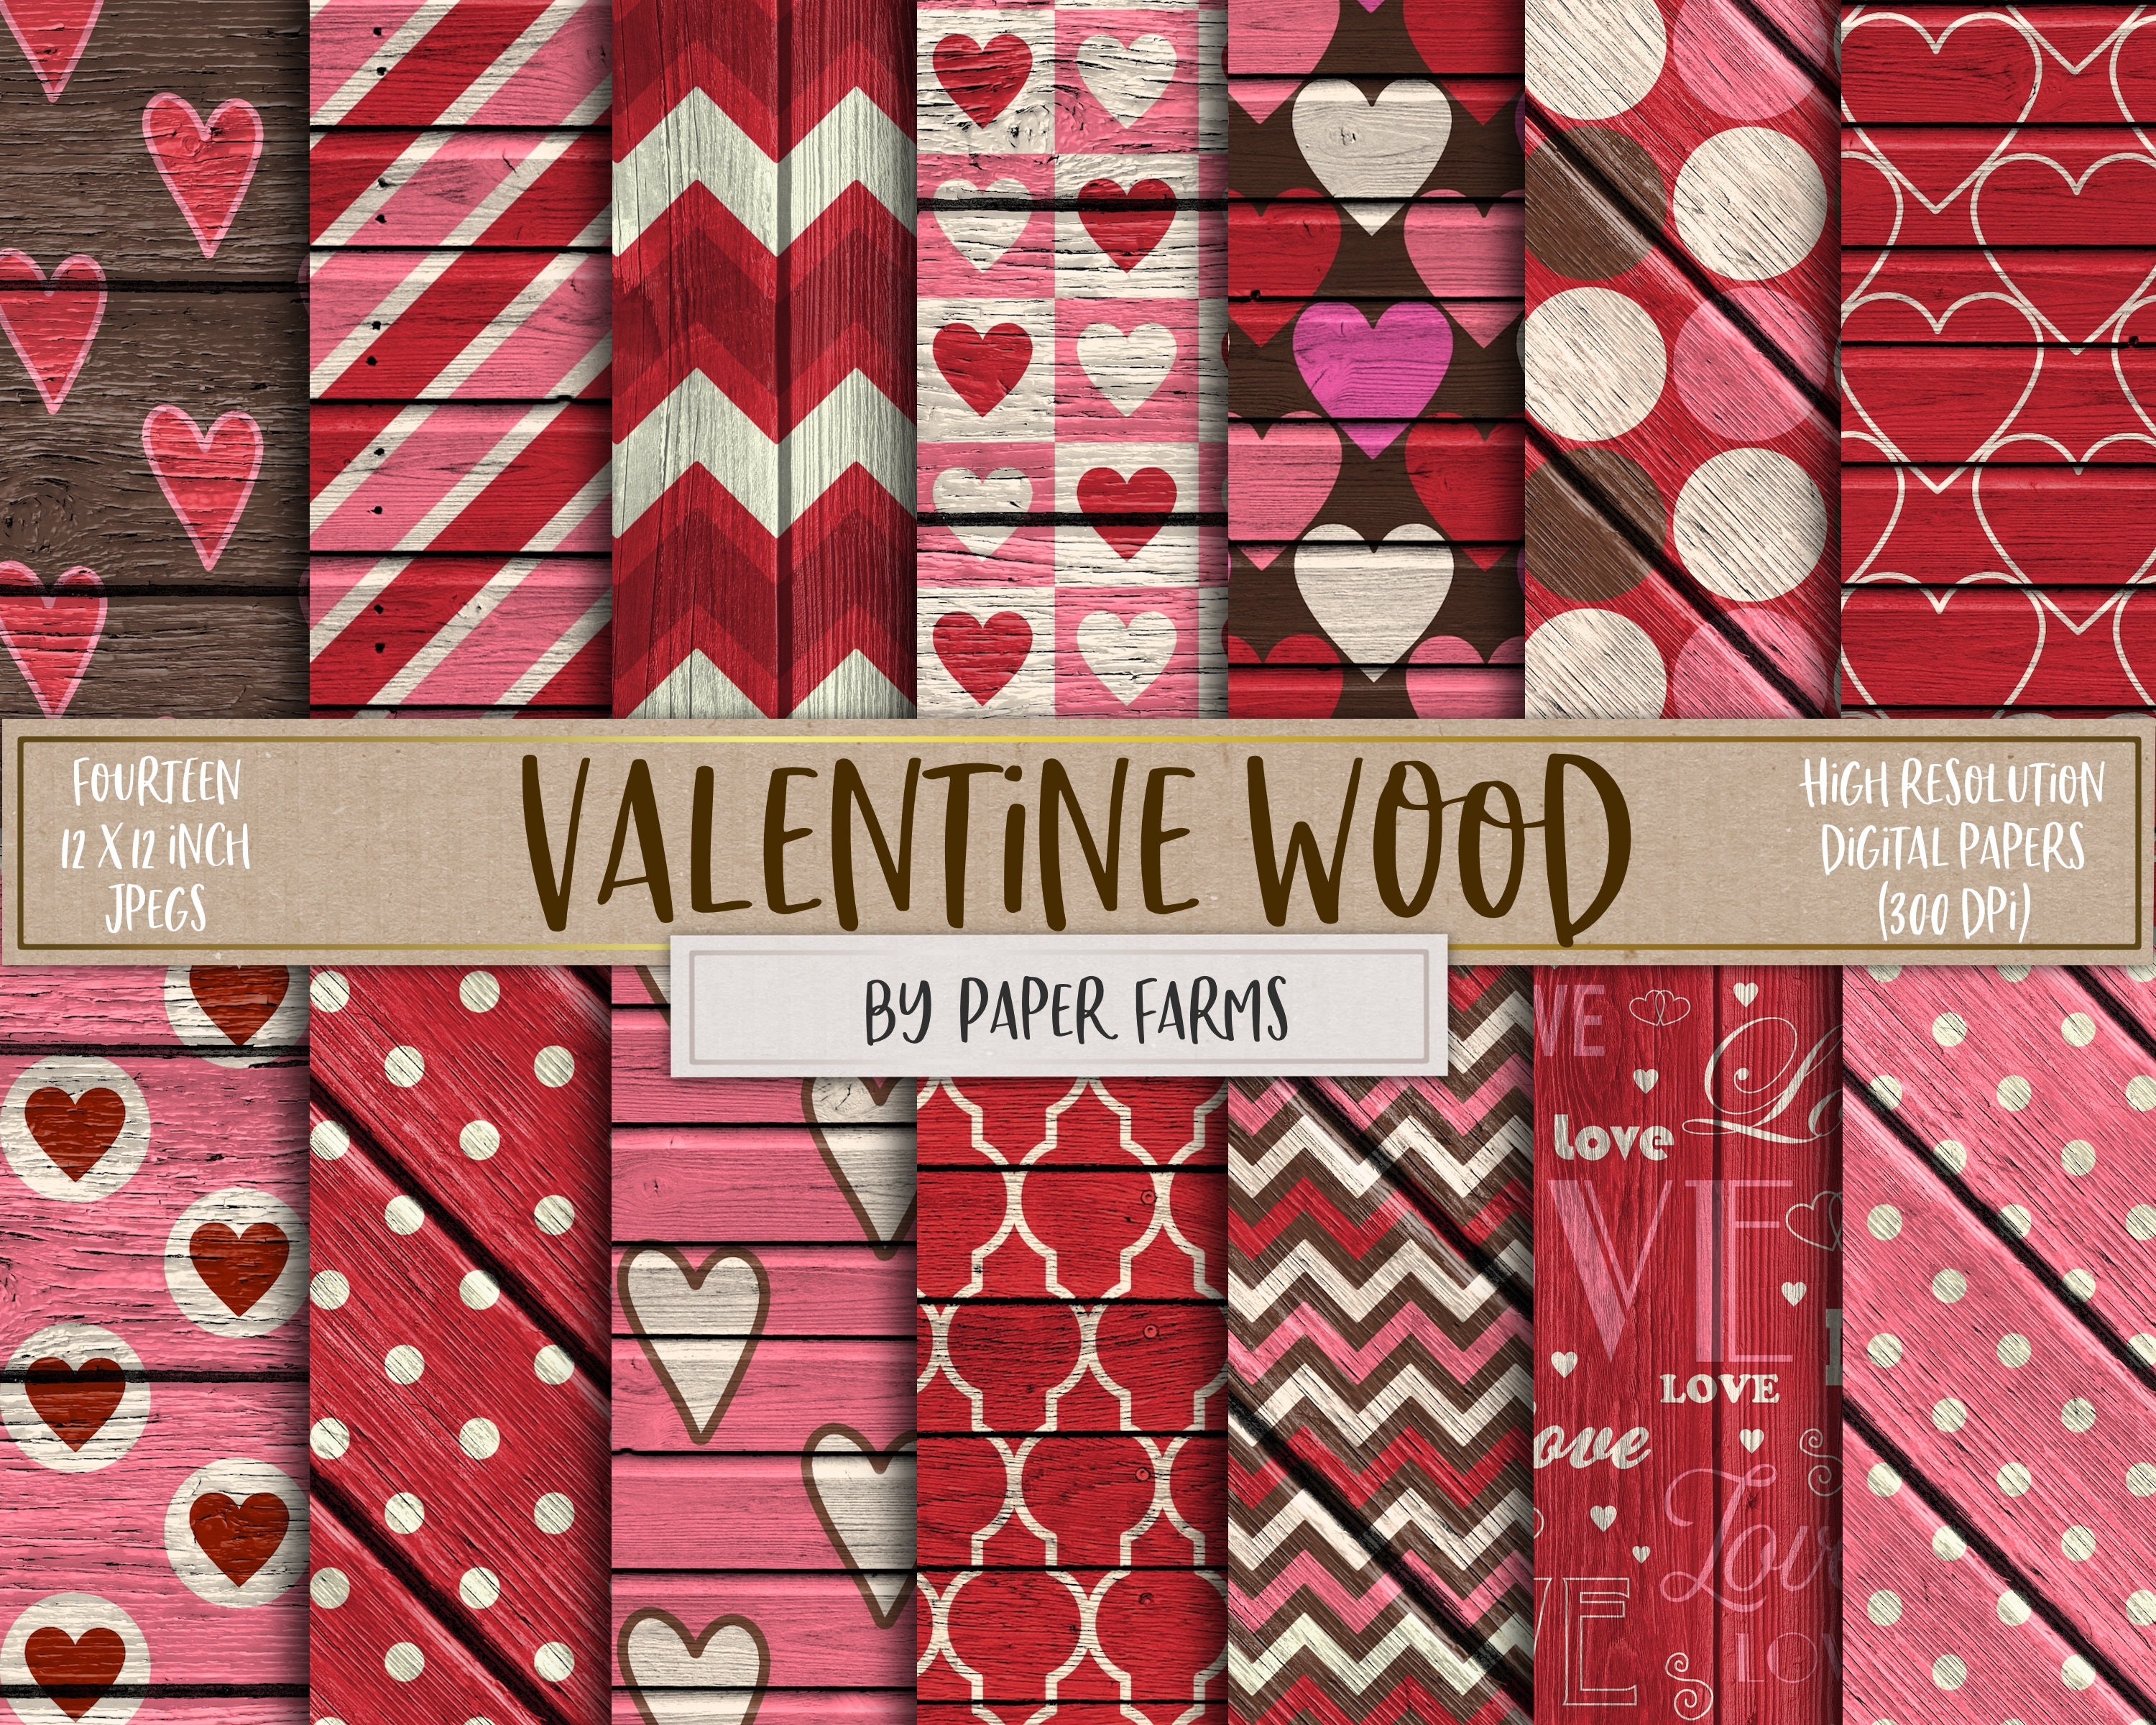 Rustic valentine, digital paper, scrapbook paper, wood, valentines day,  love hearts, pink, red, patterns, rustic, background, DOWNLOAD